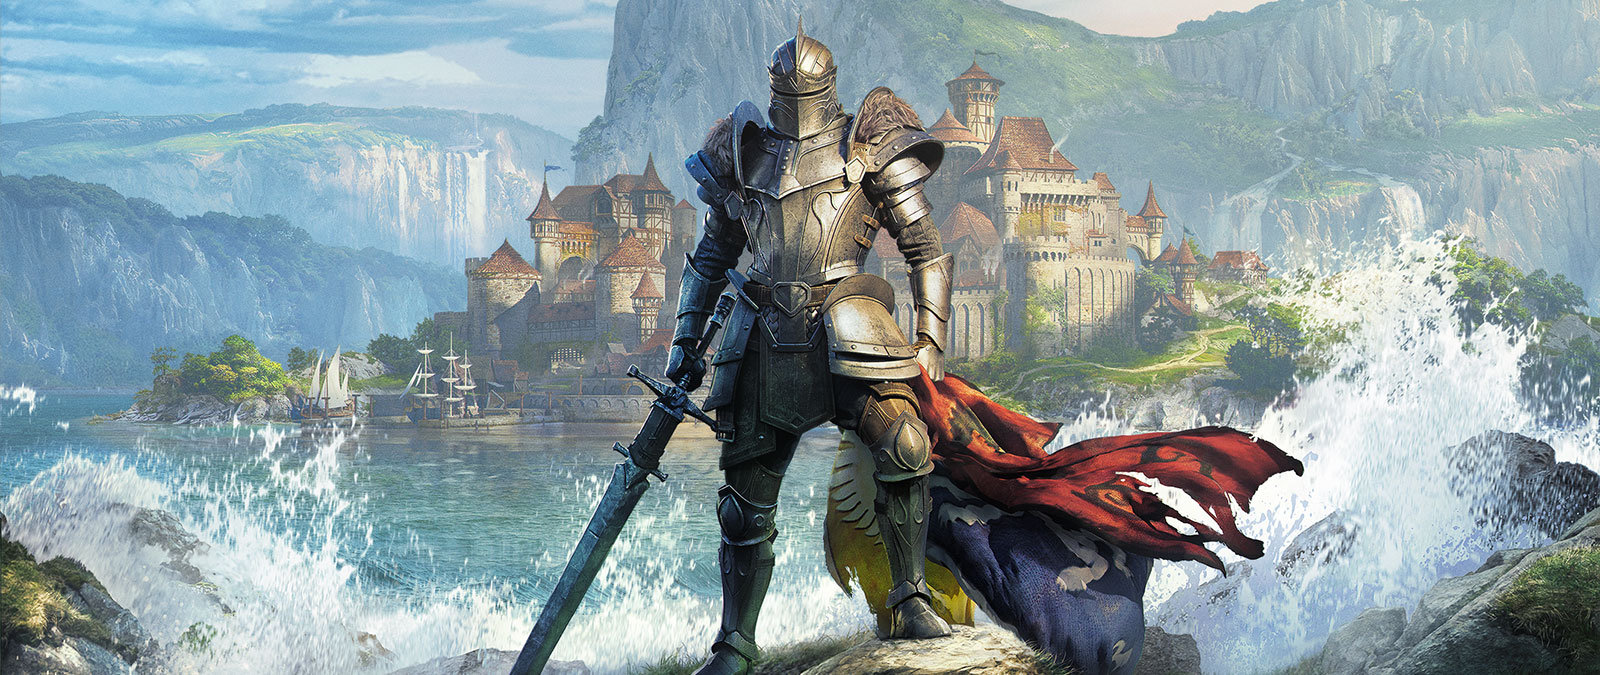 An armored warrior stands on a rocky precipice overlooking an island castle.